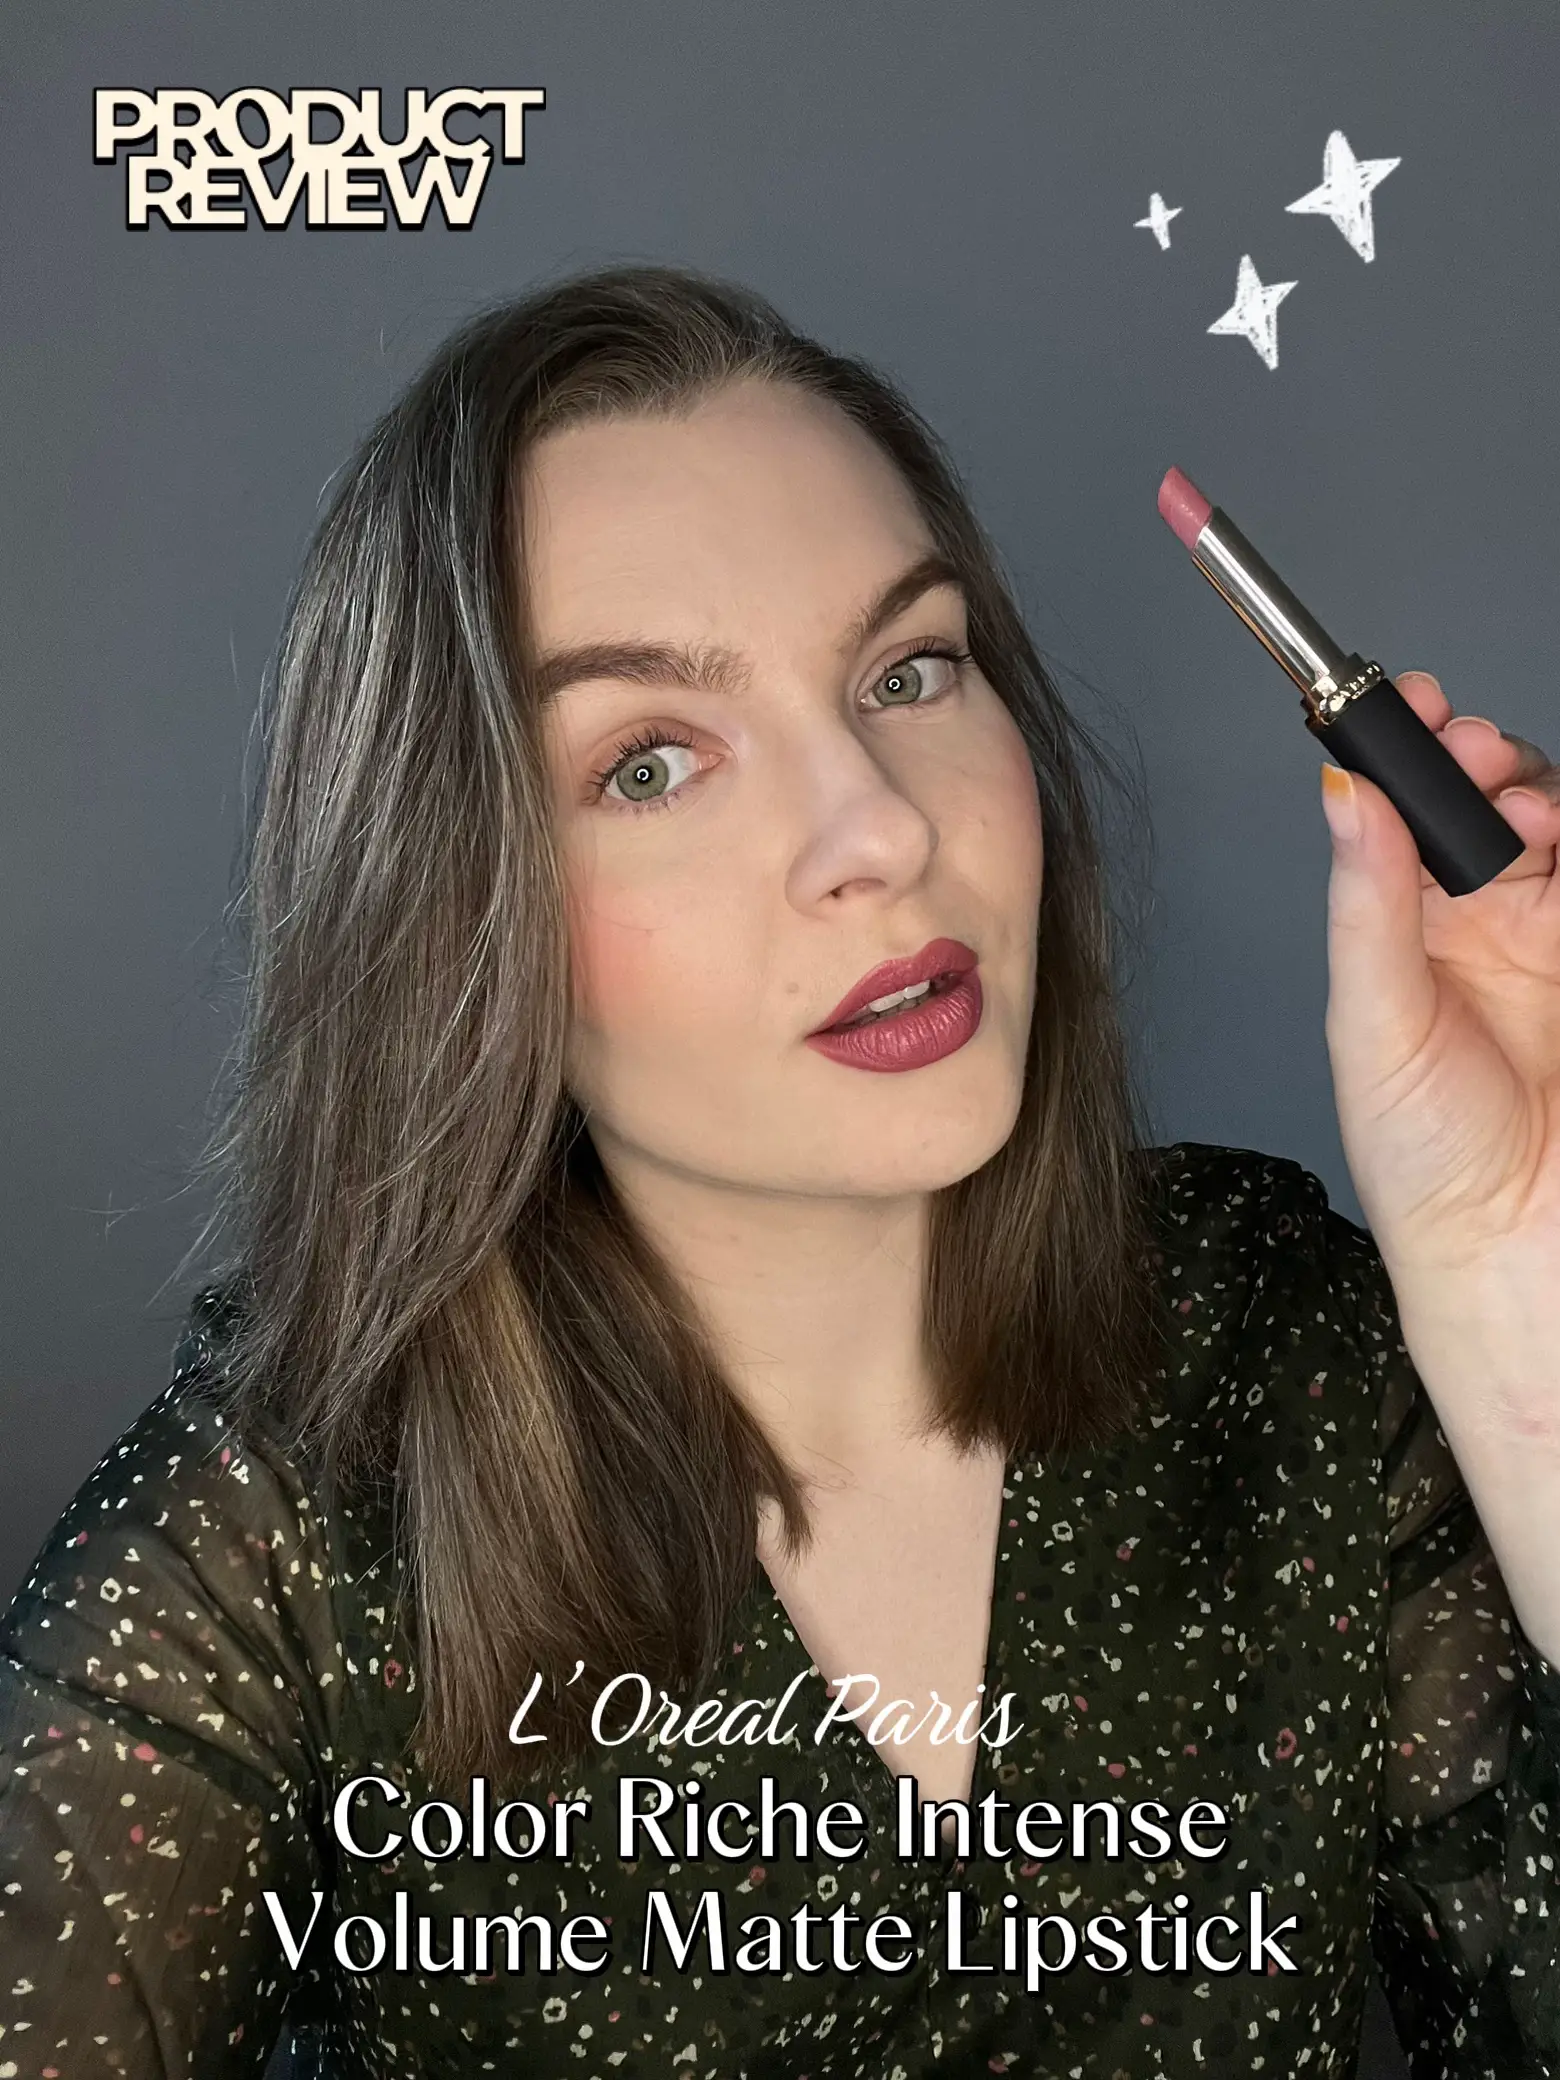 Dupe There It Is. Chanel Glossimer vs. L'Oreal Colour Riche